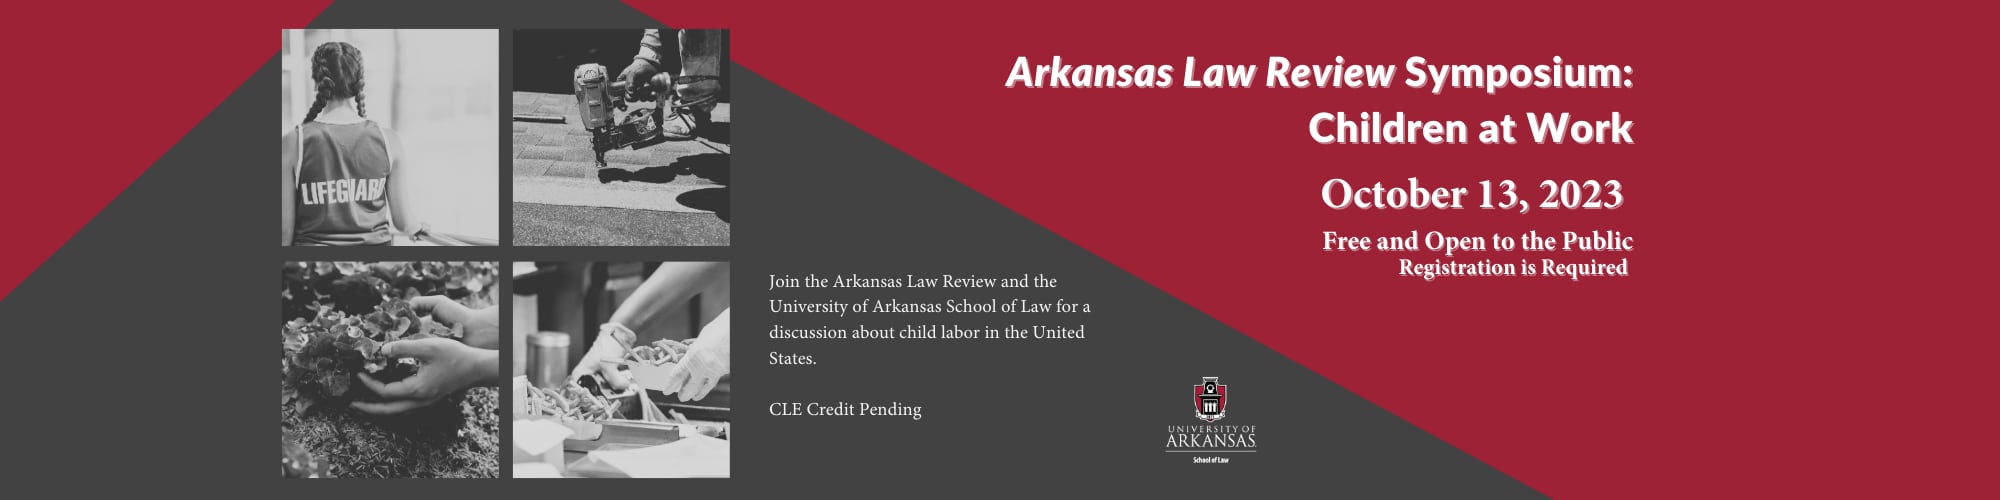 Arkansas Law Review Fall 2023 Symposium, Oct 13: Children at Work